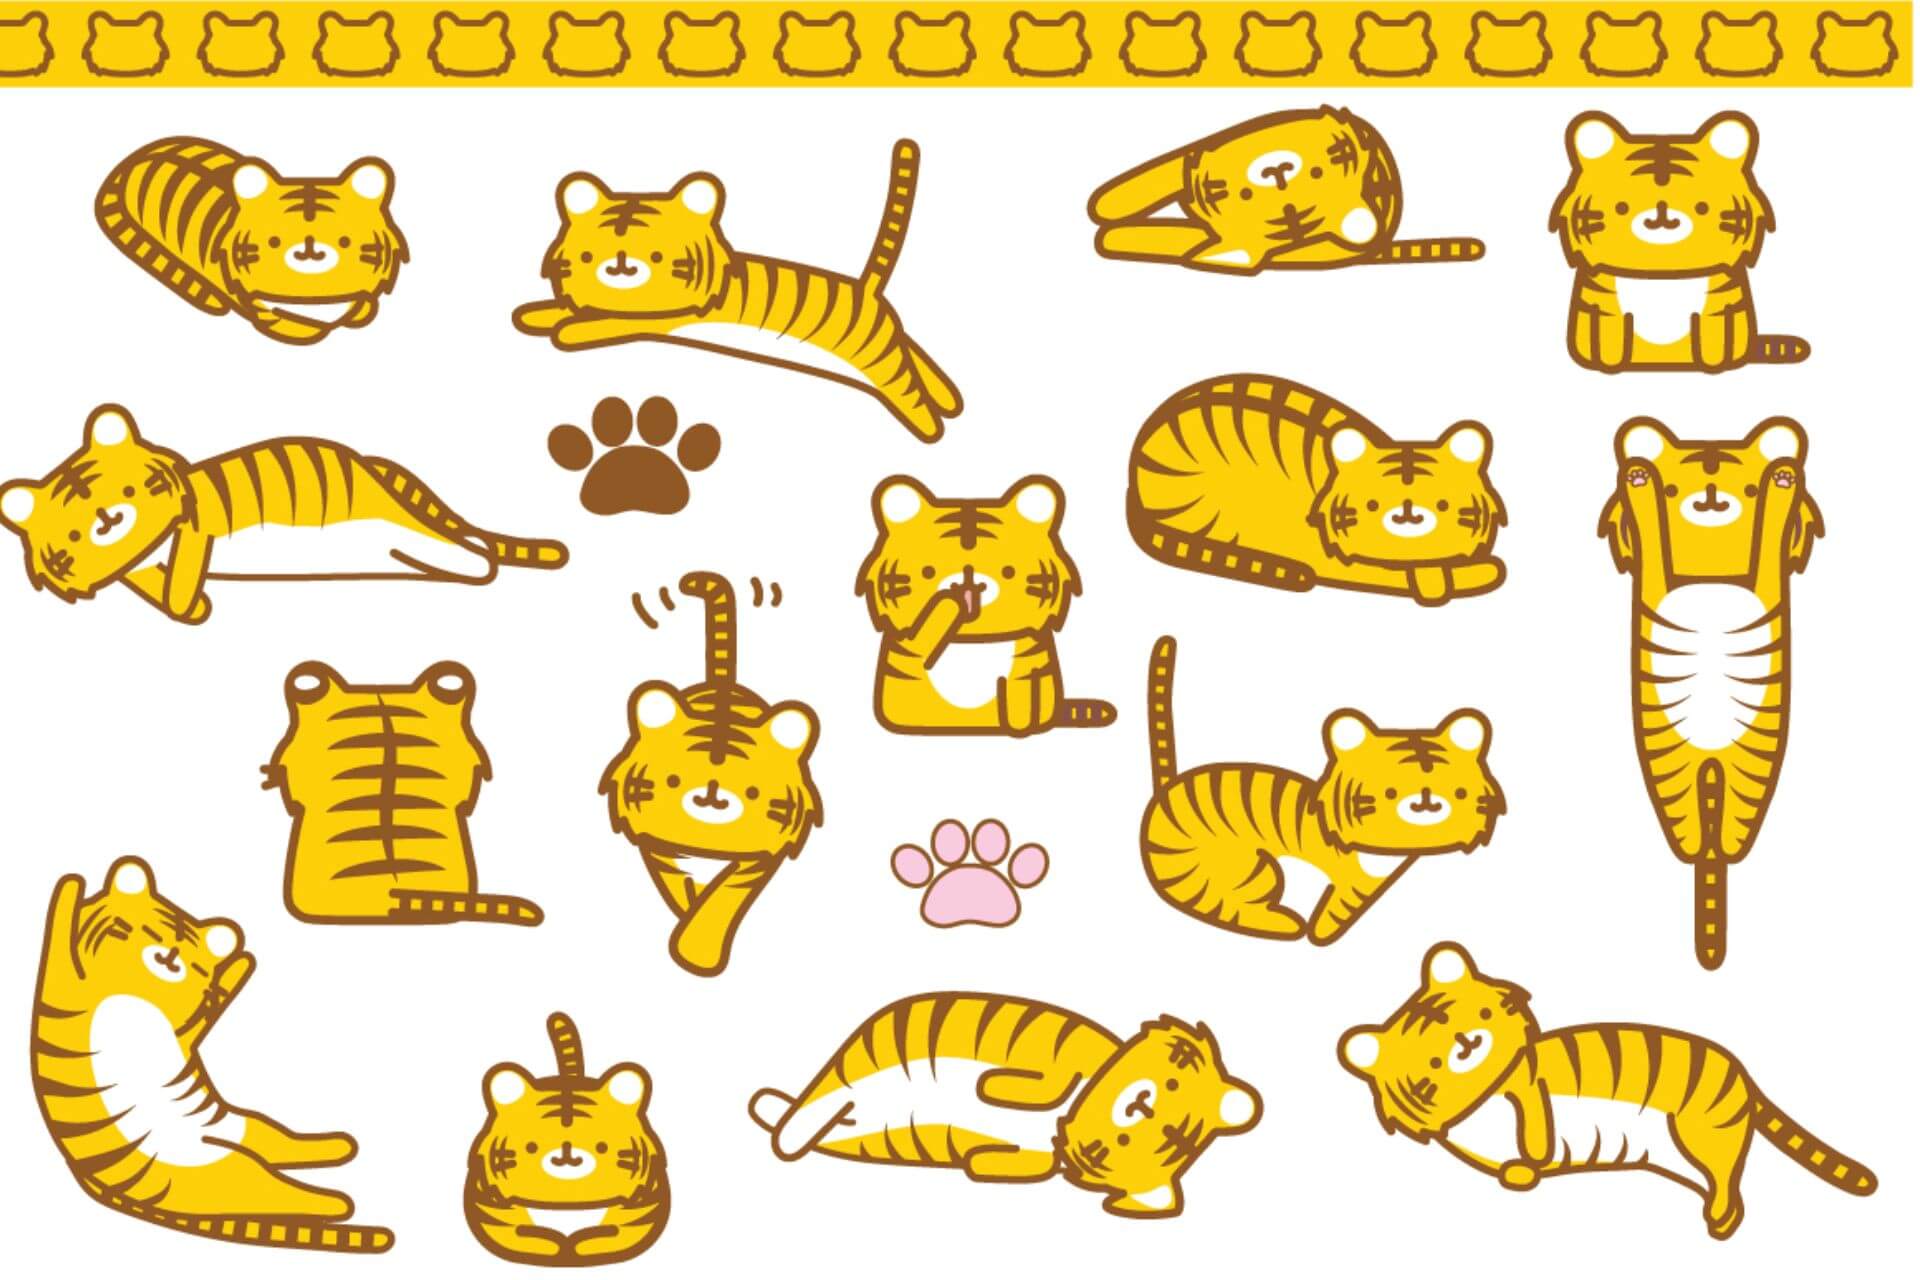 2022 – Year of the Tiger: Royalty-Free Tiger Vectors for Awesome Design